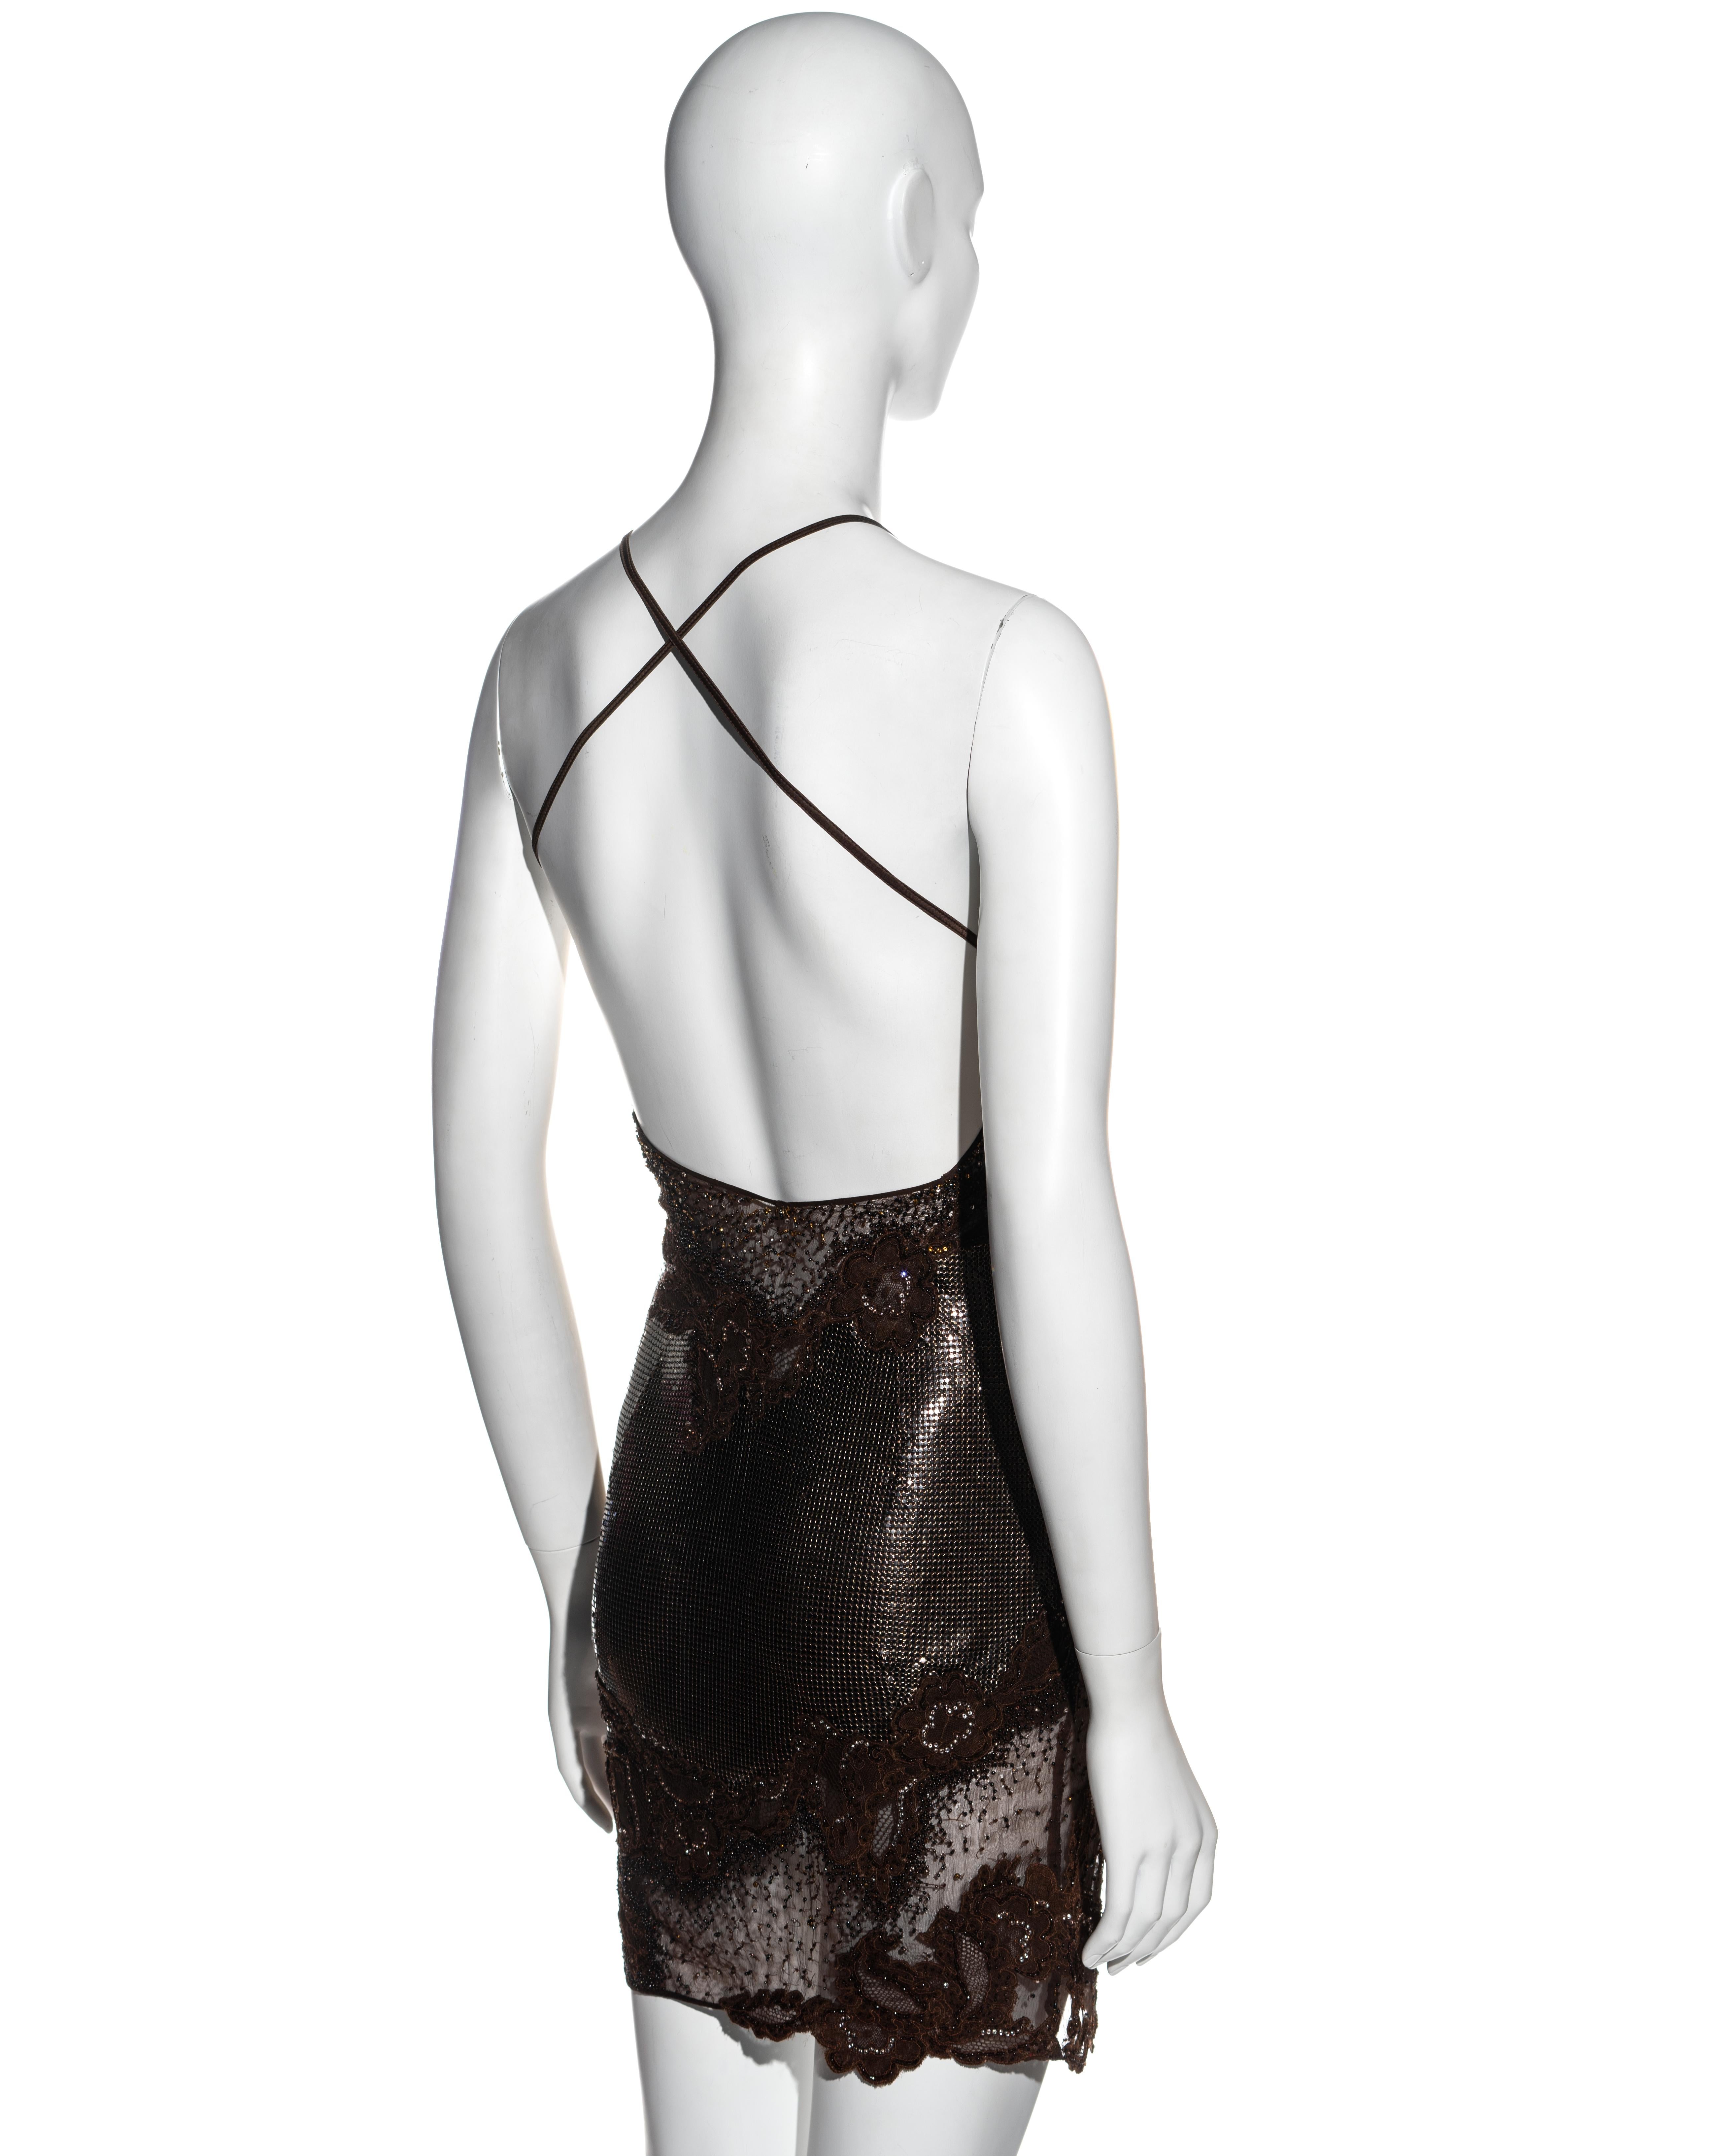 Women's Atelier Versace brown Oroton chainmail and lace embellished mini dress, ss 1996